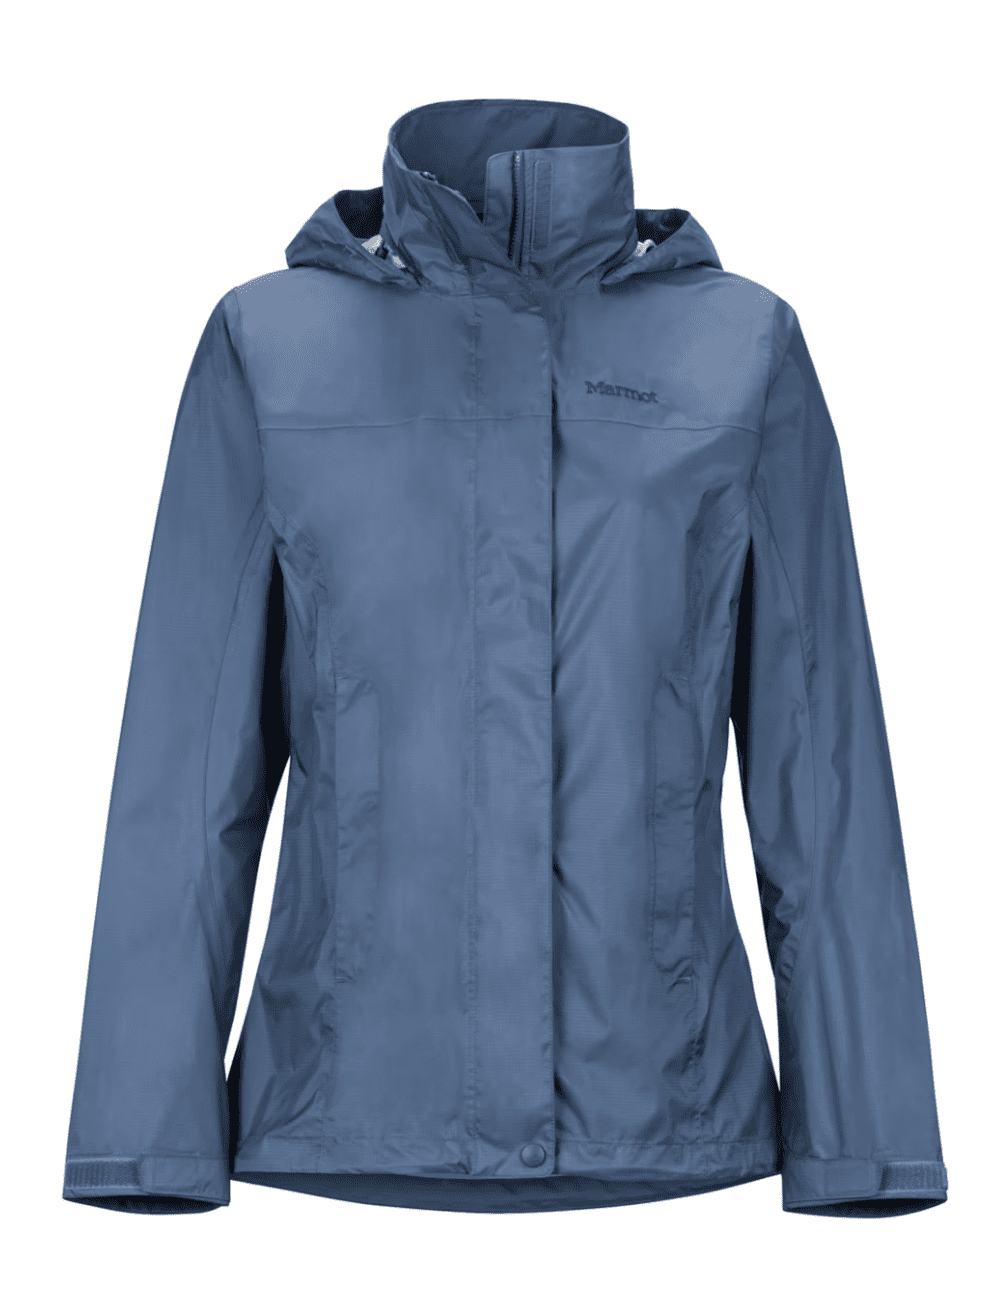 Hiking Jackets for Women